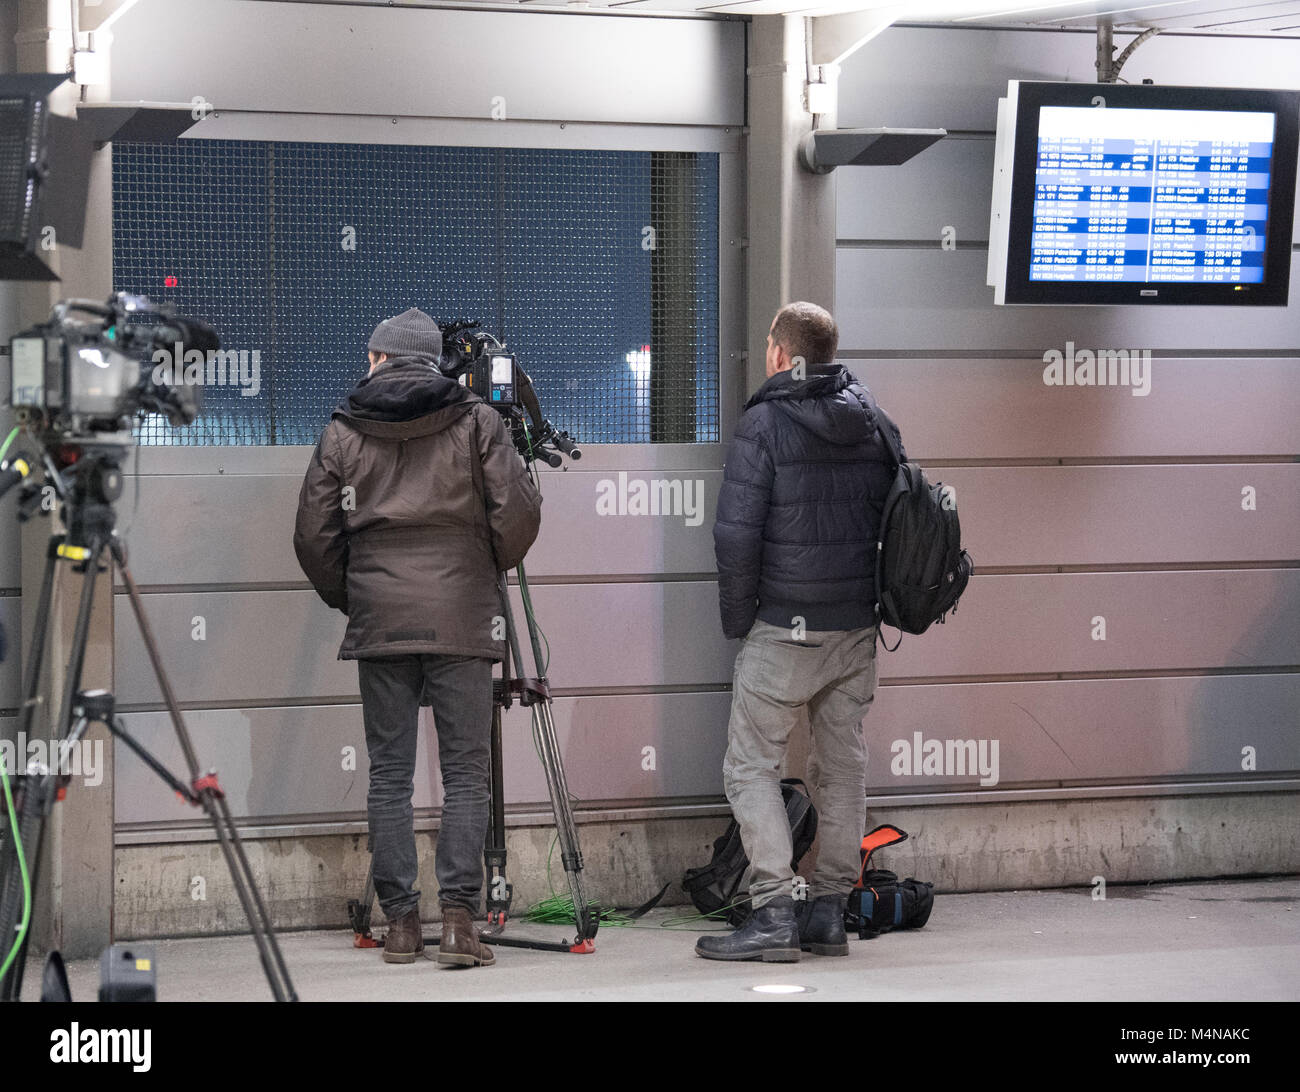 Berlin, Germany. 16th Feb, 2018. Journalists await the arrival of German-Turkish 'Die Welt' journalist Deniz Yucel at Tegel airport in Berlin, Germany, 16 February 2018. After spending one year in prison, Yucel, who works as a foreign correspondent for 'Die Welt' newspaper, was released from the correctional facility in Silivri near Istanbul. A court had ordered the release after the Turkish prosecution had submitted the indictment. Credit: Ralf Hirschberger/dpa-Zentralbild/dpa/Alamy Live News Stock Photo